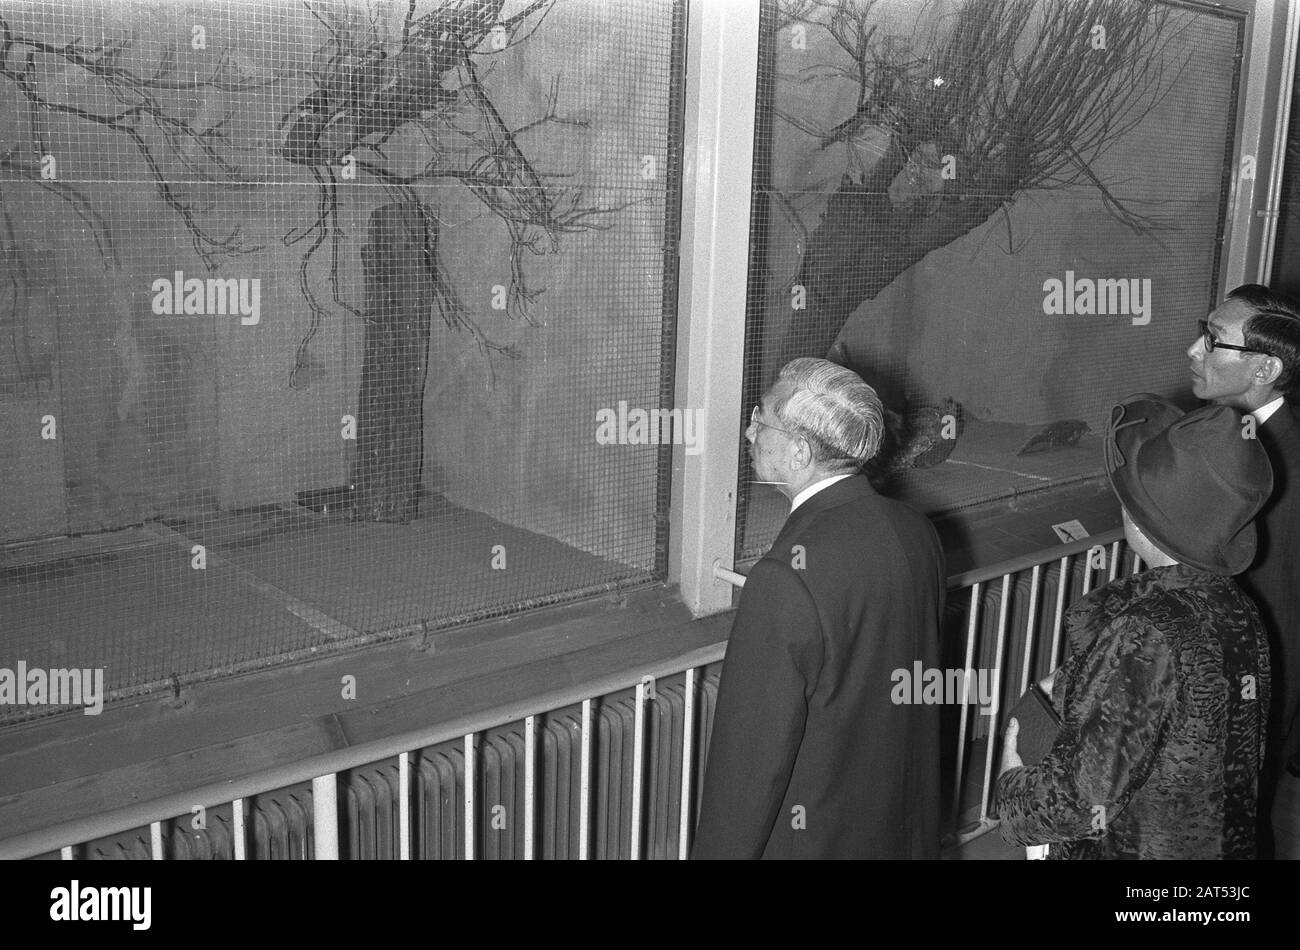 Emperor Hirohito and wife visits Artis Amsterdam Date: 9 October 1971 Location: Amsterdam, Noord-Holland Keywords: EMERINS, visits, zoos, emperors Personal name: Hirohito, emperor of Japan Stock Photo